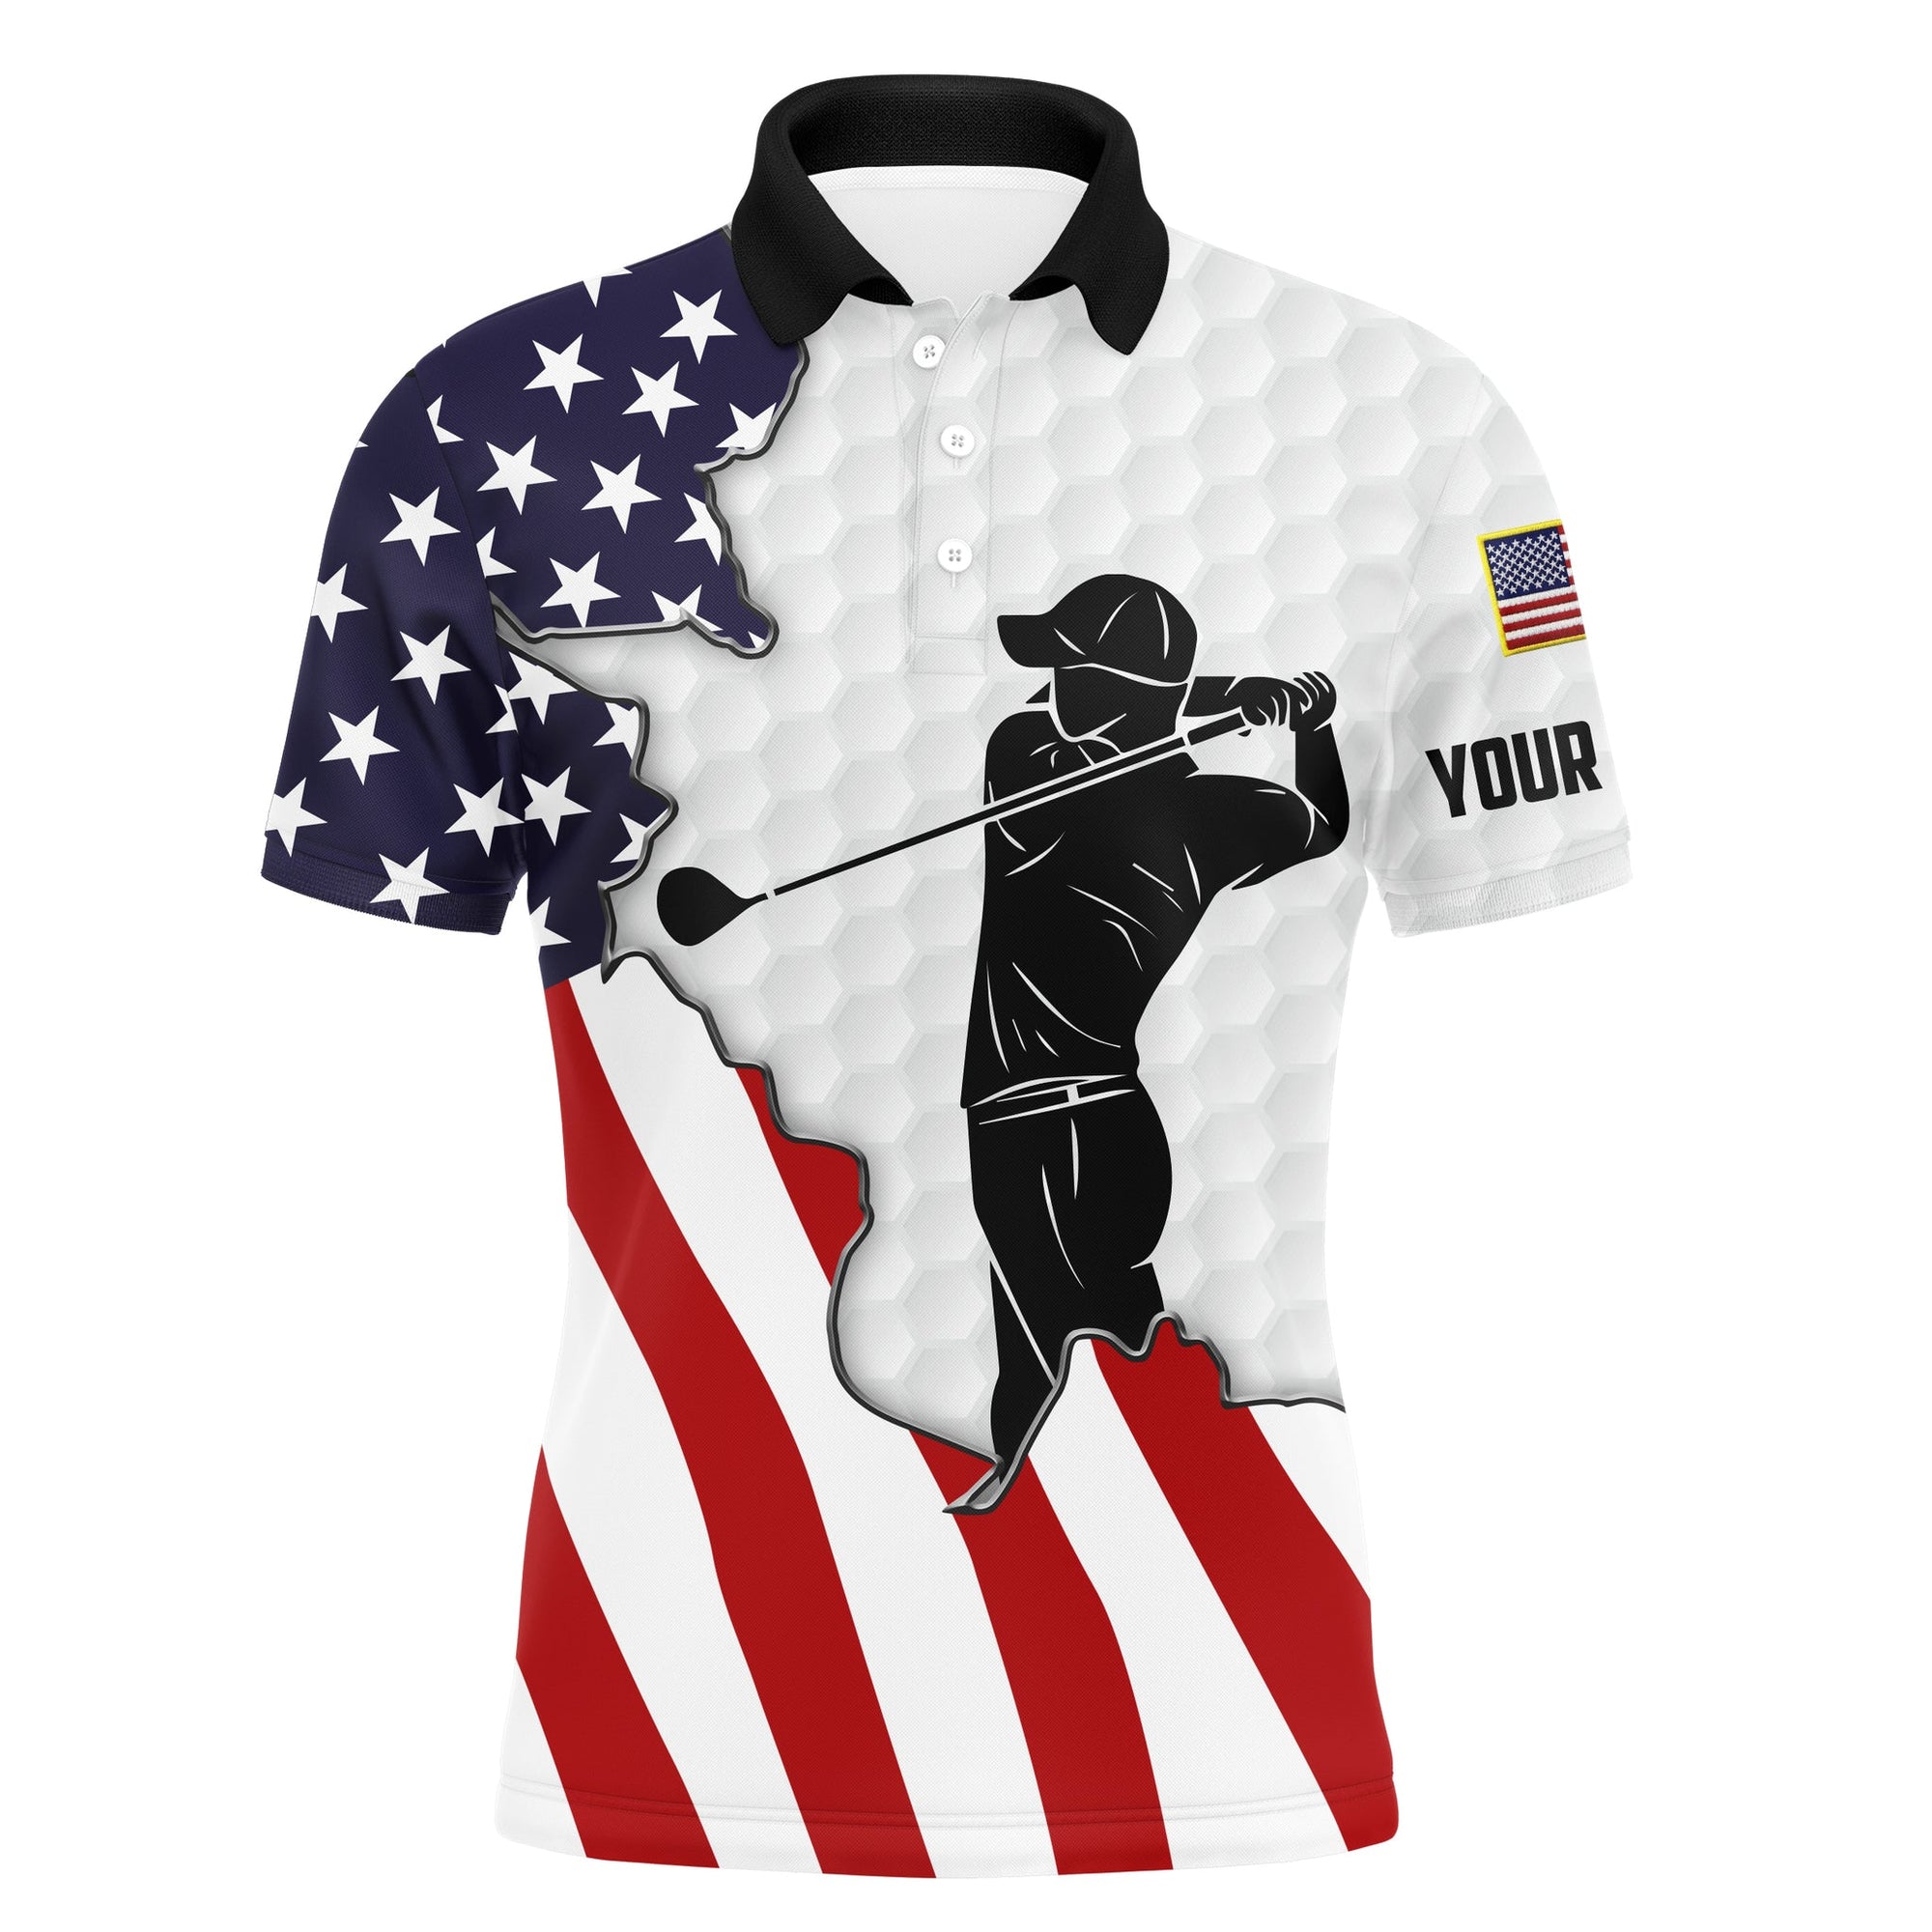 Golf Custom Name Men Polo Shirt - American Flag Patriotic White Apparel - Personalized Best Gift For Golf Lover, Team, Golfer, 4th July